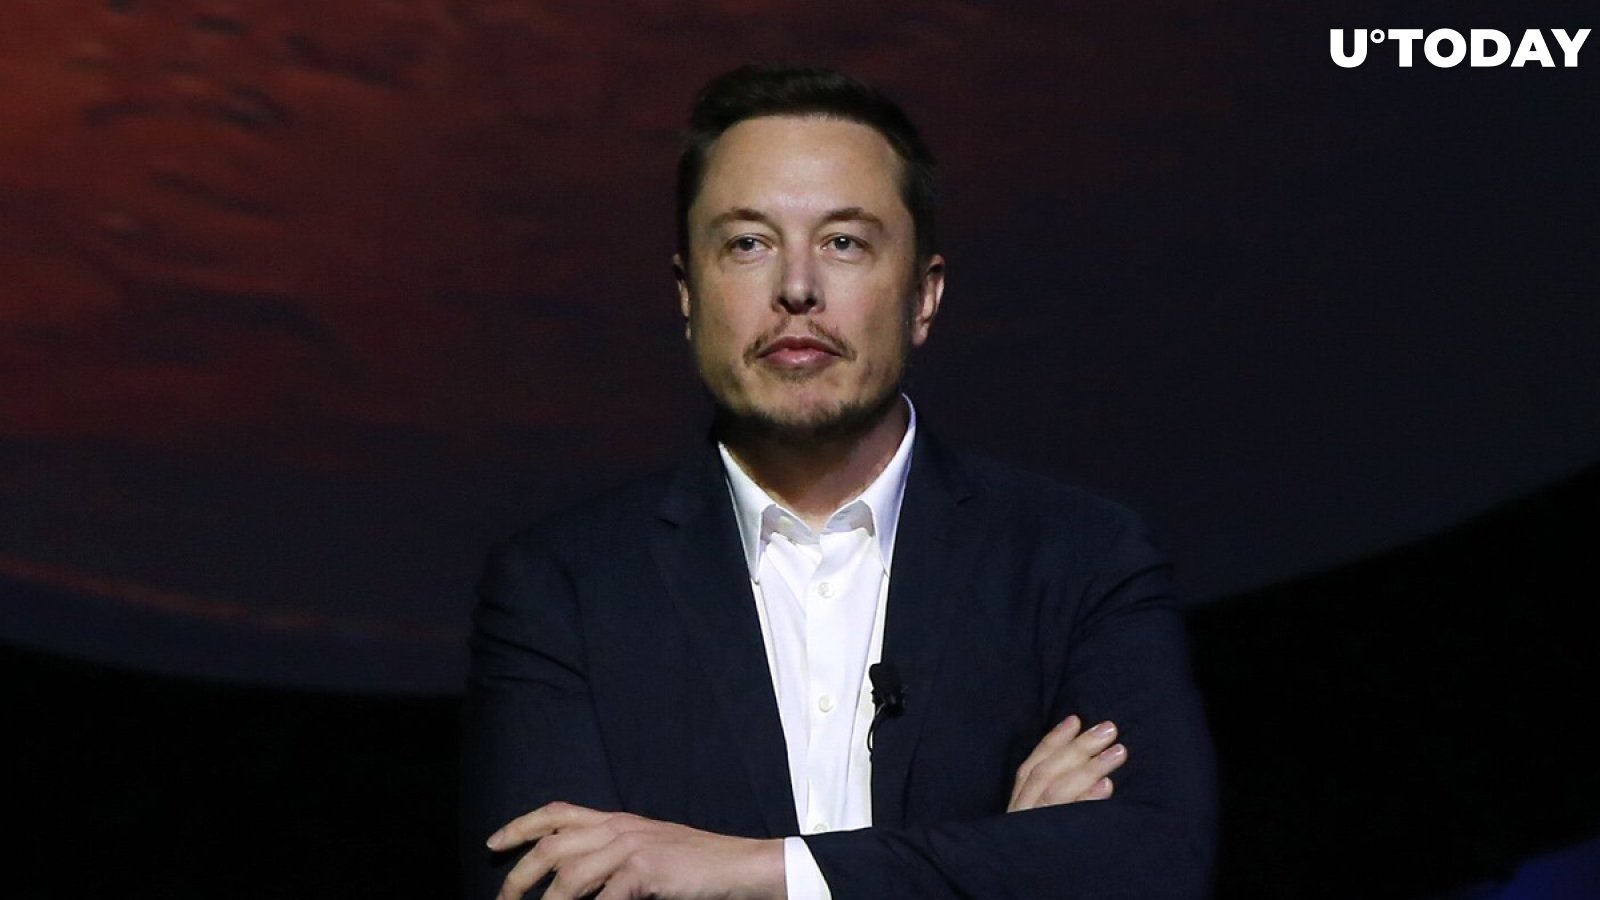 Elon Musk Addresses Criticism Surrounding His Cryptocurrency Tweets